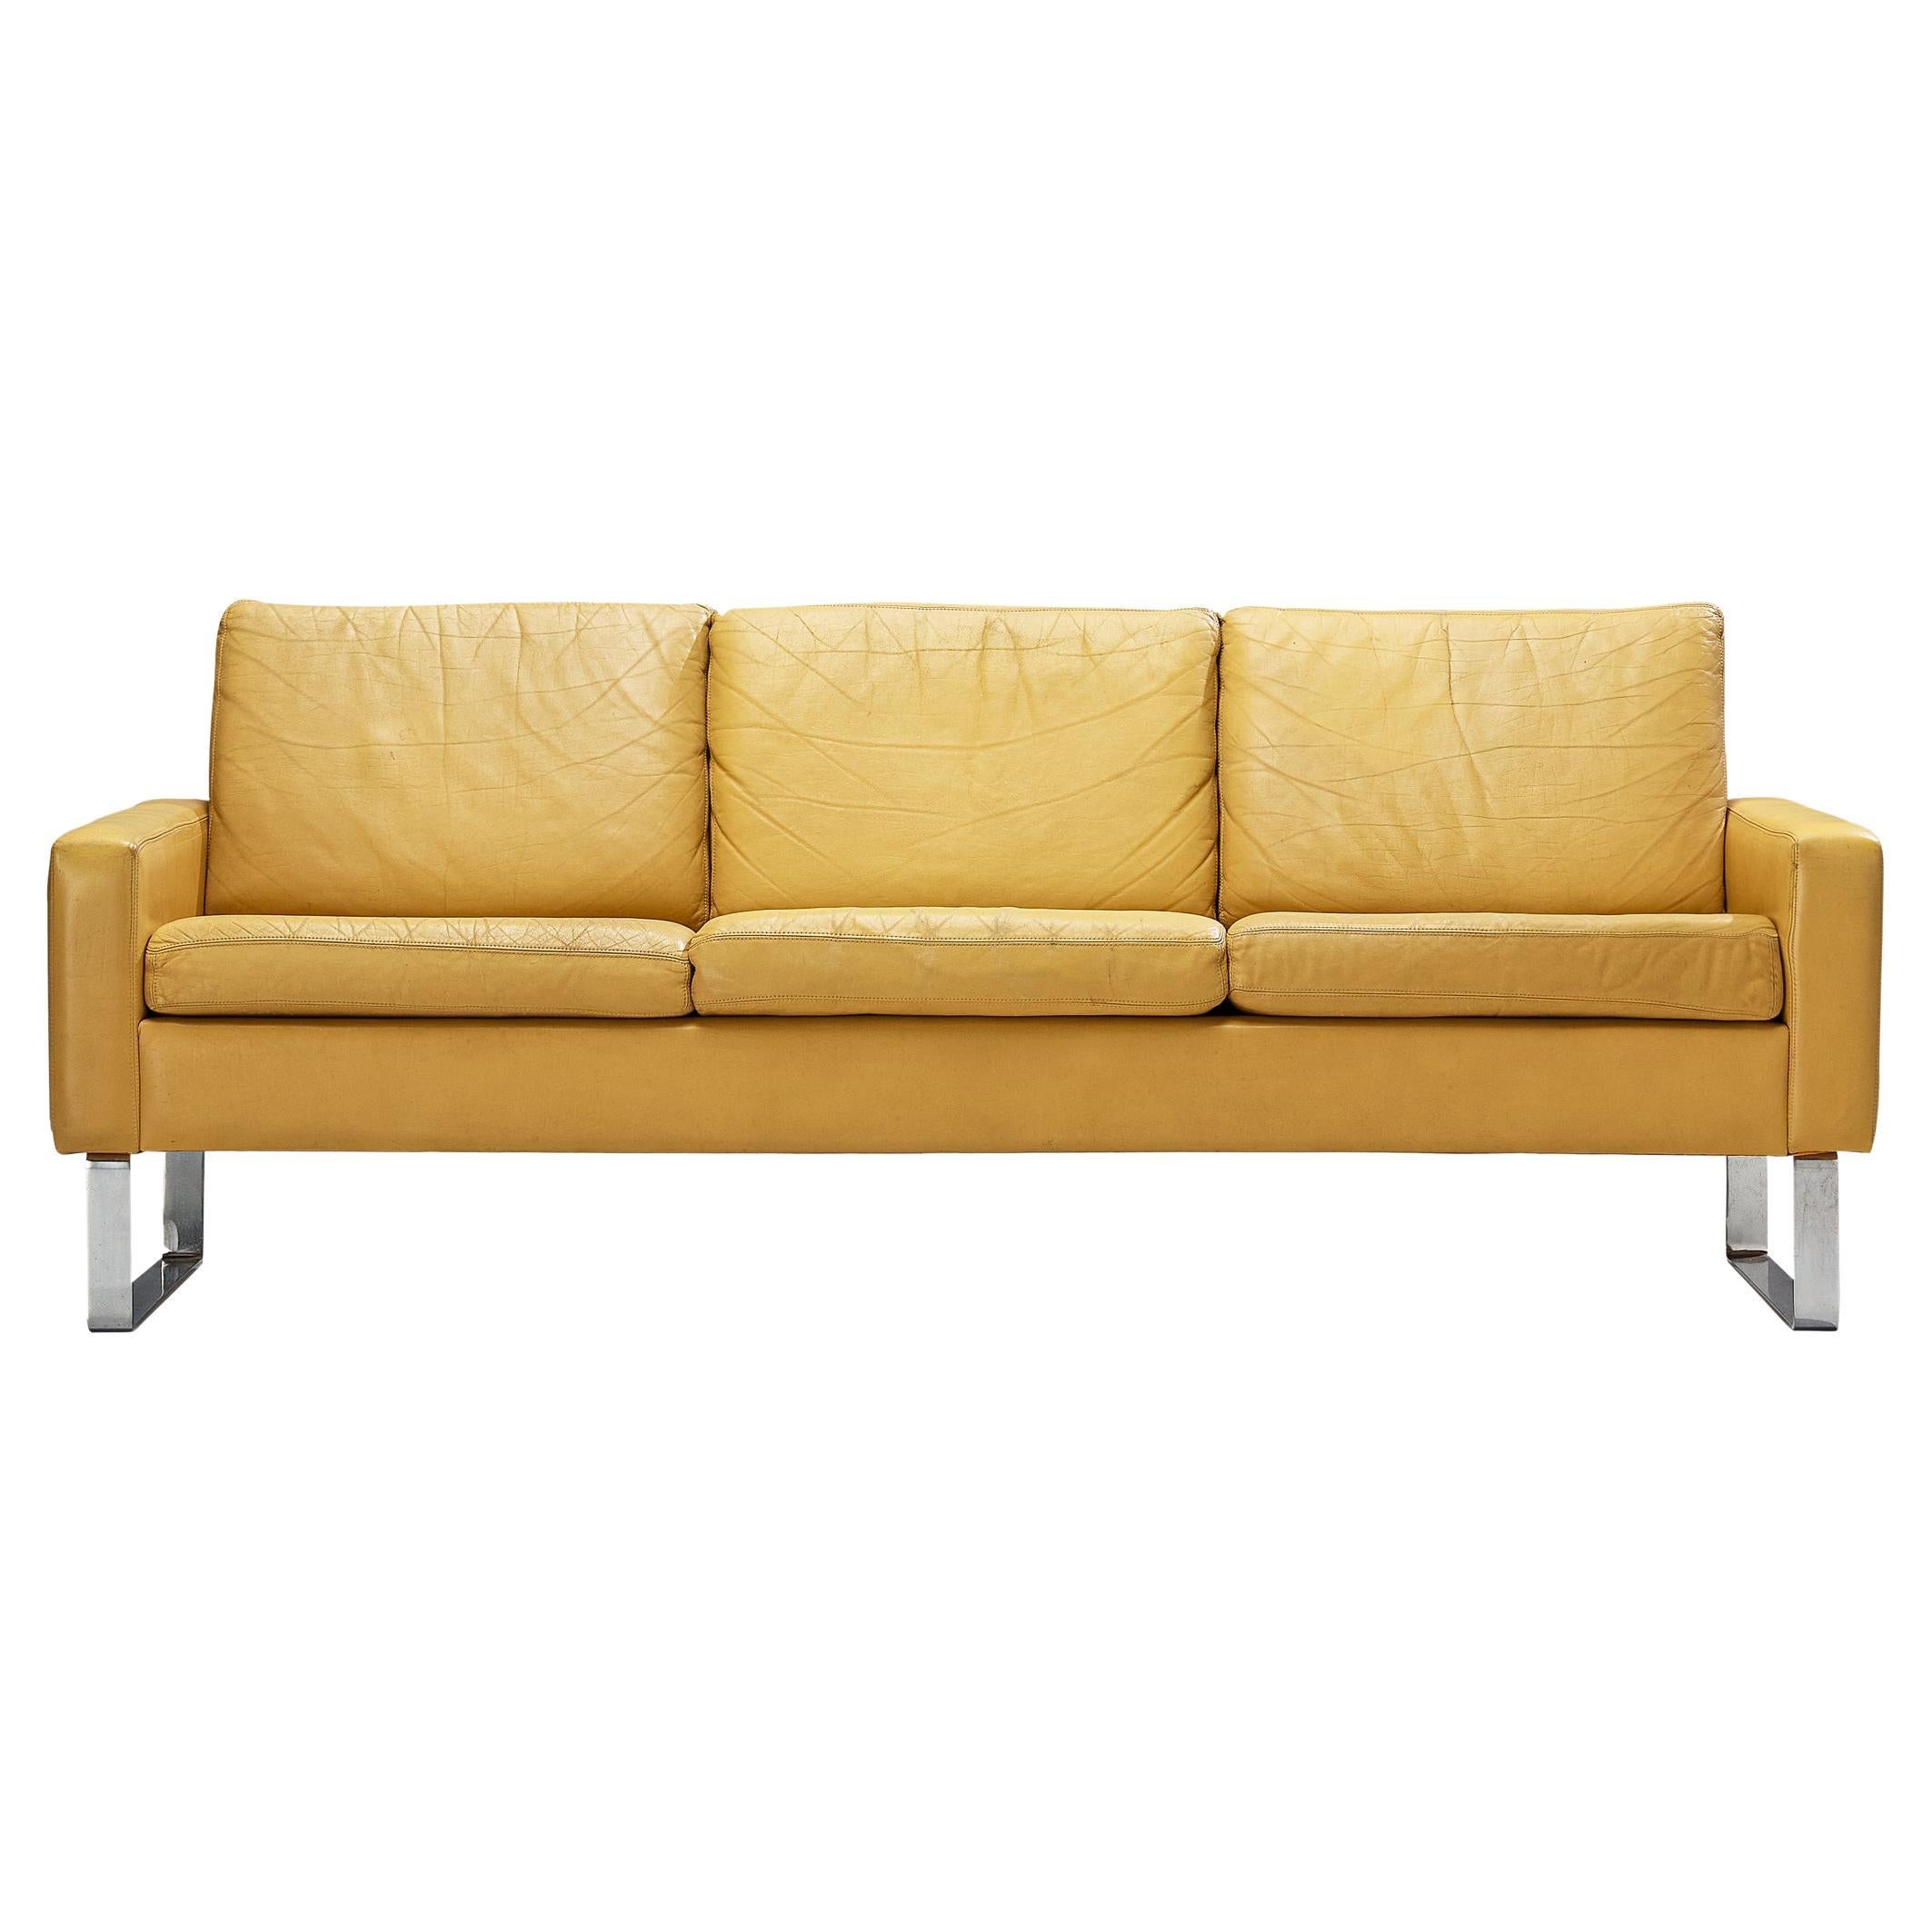 Mid-Century Modern Sofa in Camel Yellow Leather and Steel For Sale